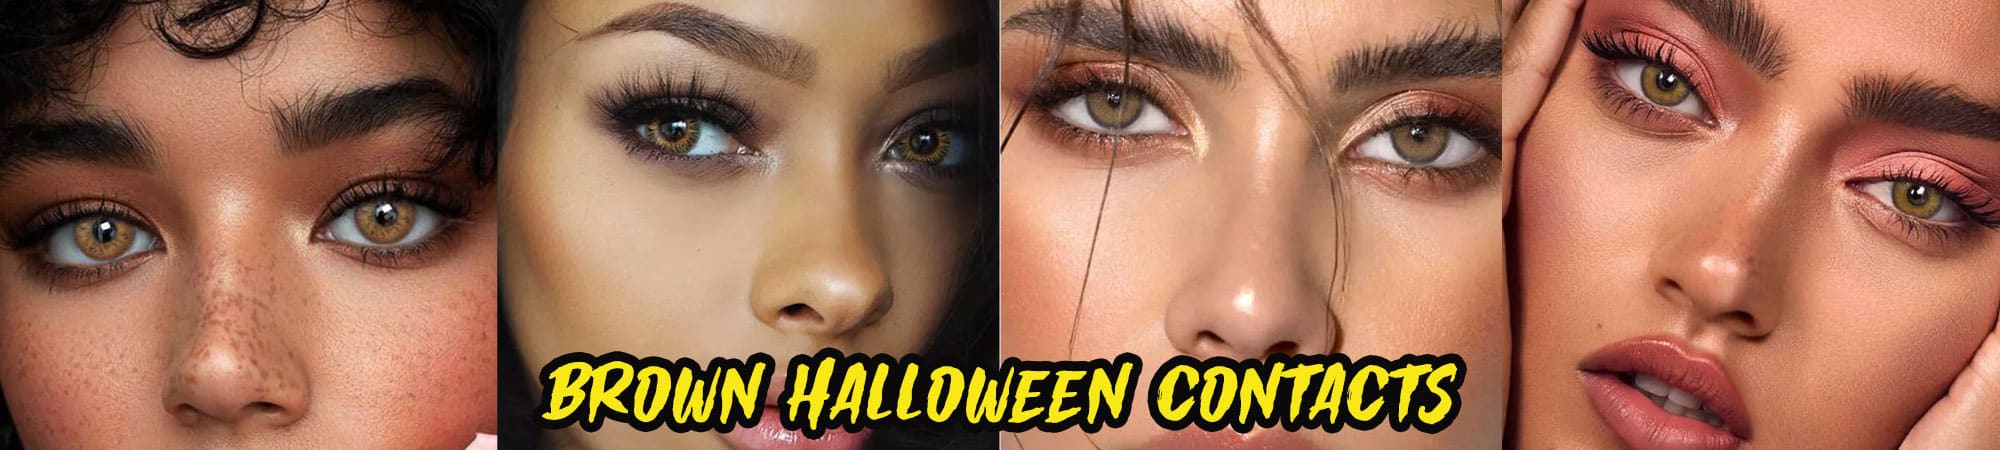 Brown Halloween Contacts